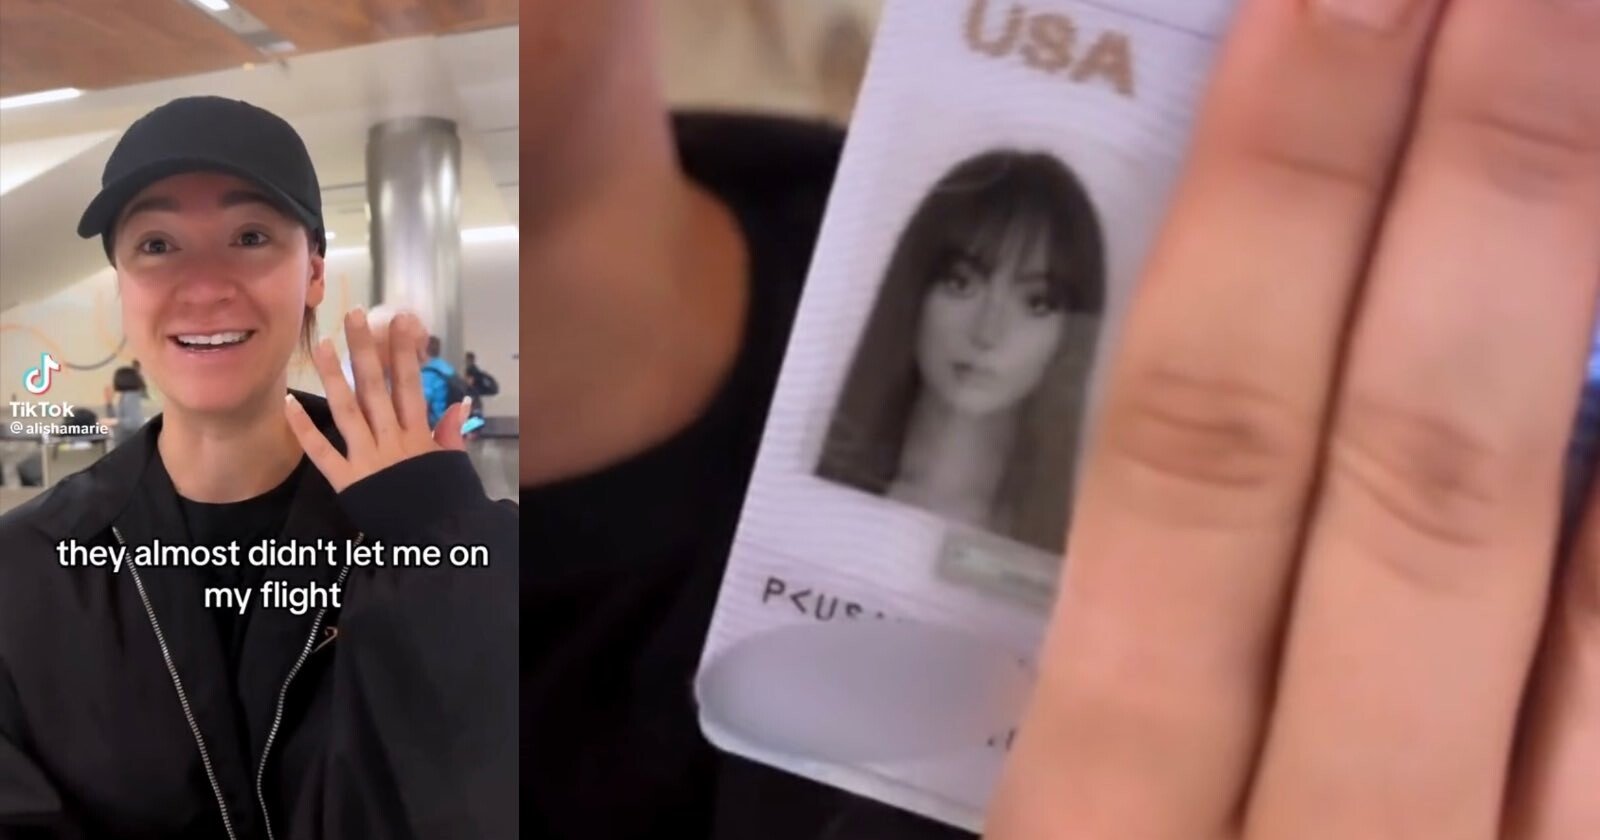 Influencer Nearly Barred From Flight Because of Hot Passport Photo